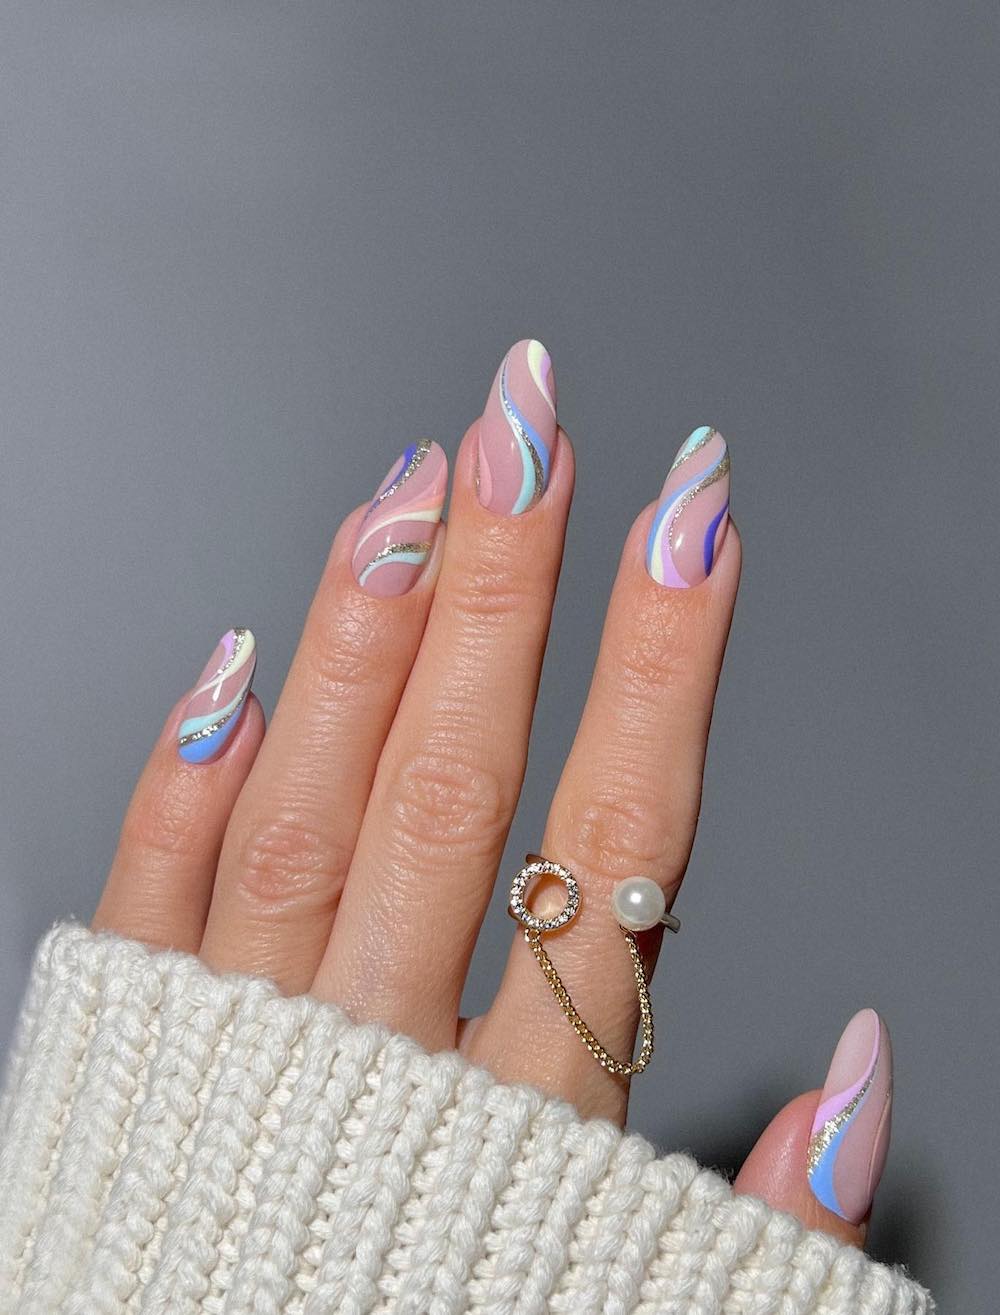 A hand with long nude almond nails with light blue, green, pink, purple, white, and silver glitter waves